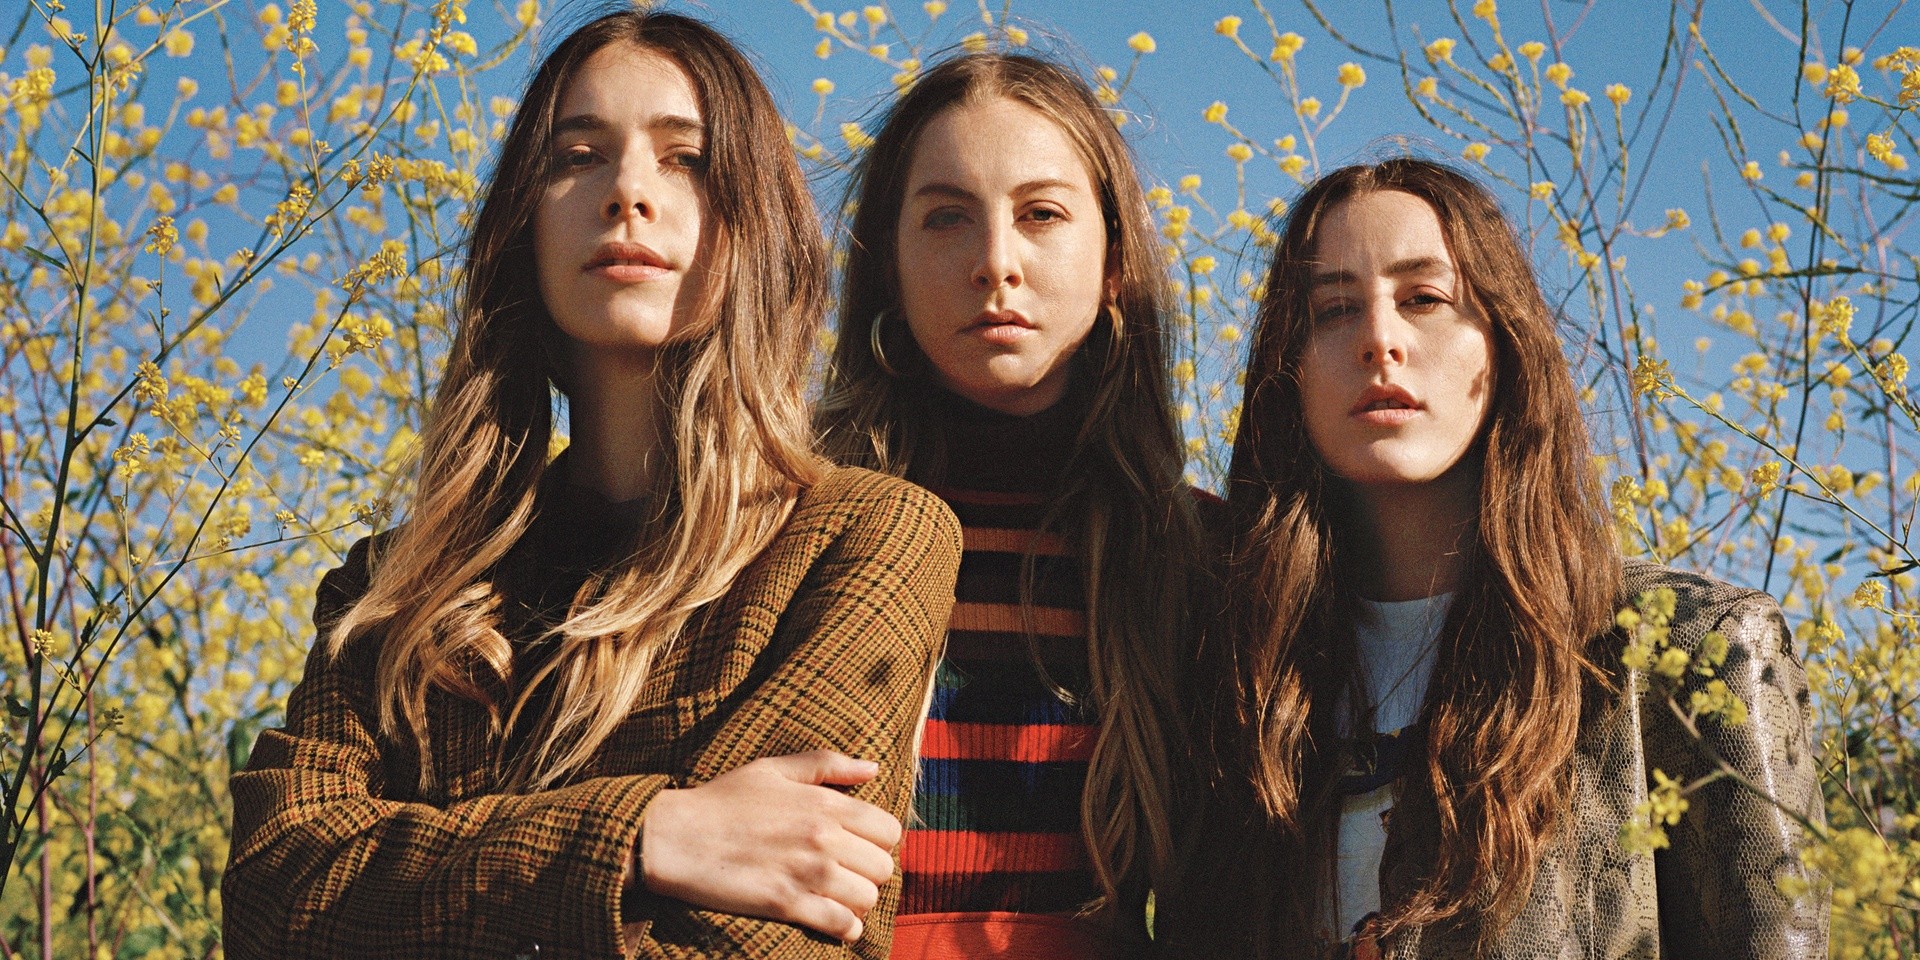 HAIM tease new musical direction with Instagram clip 